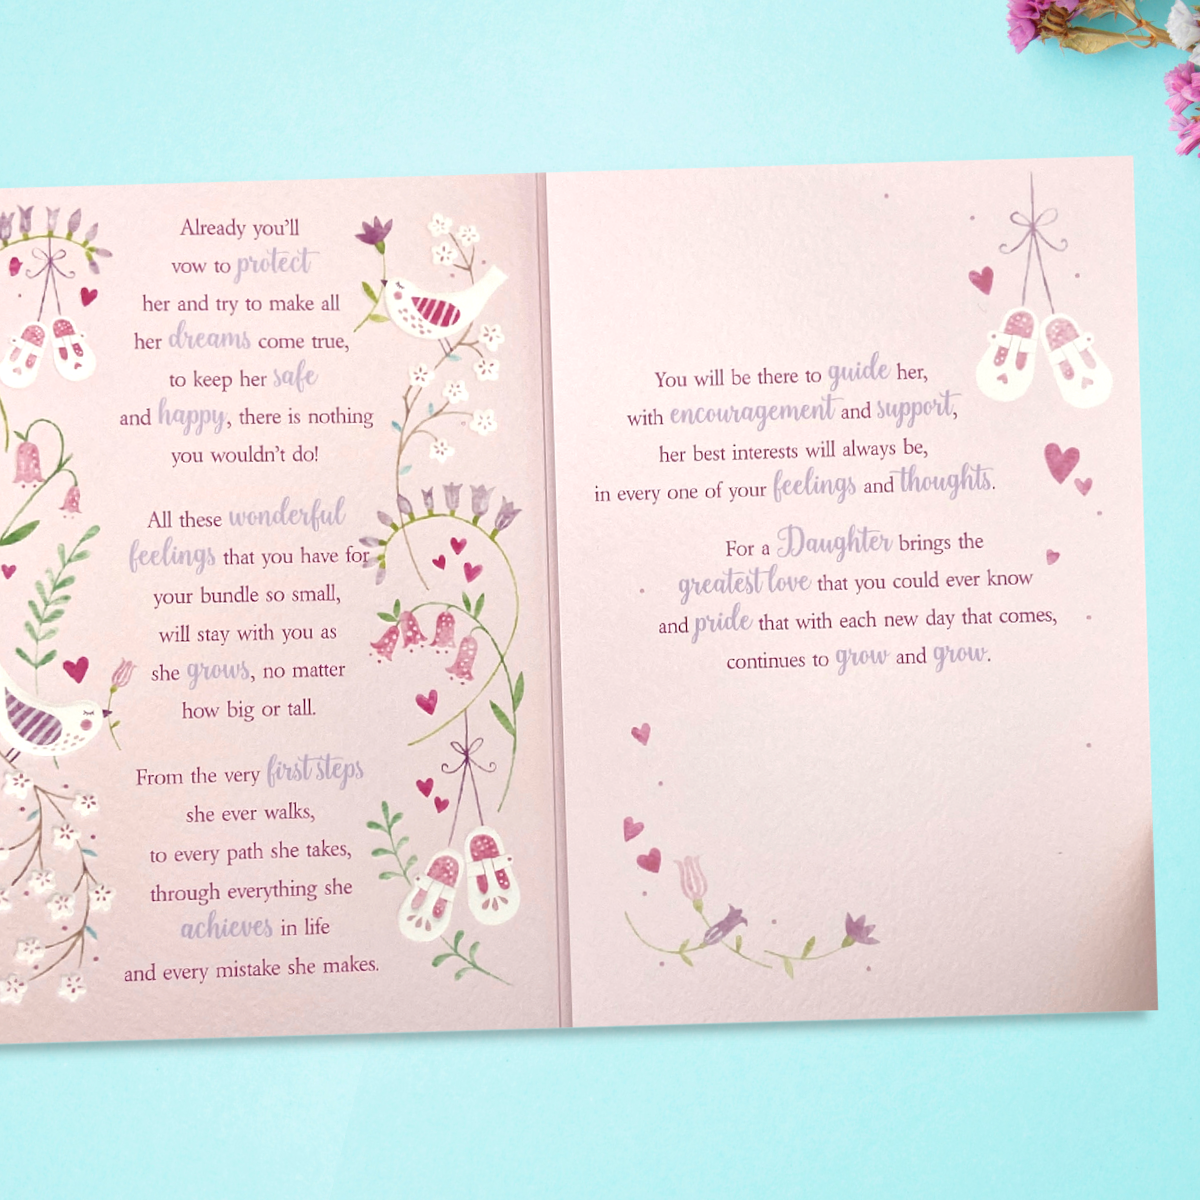 Inside image with two pink pages and verse with floral borders